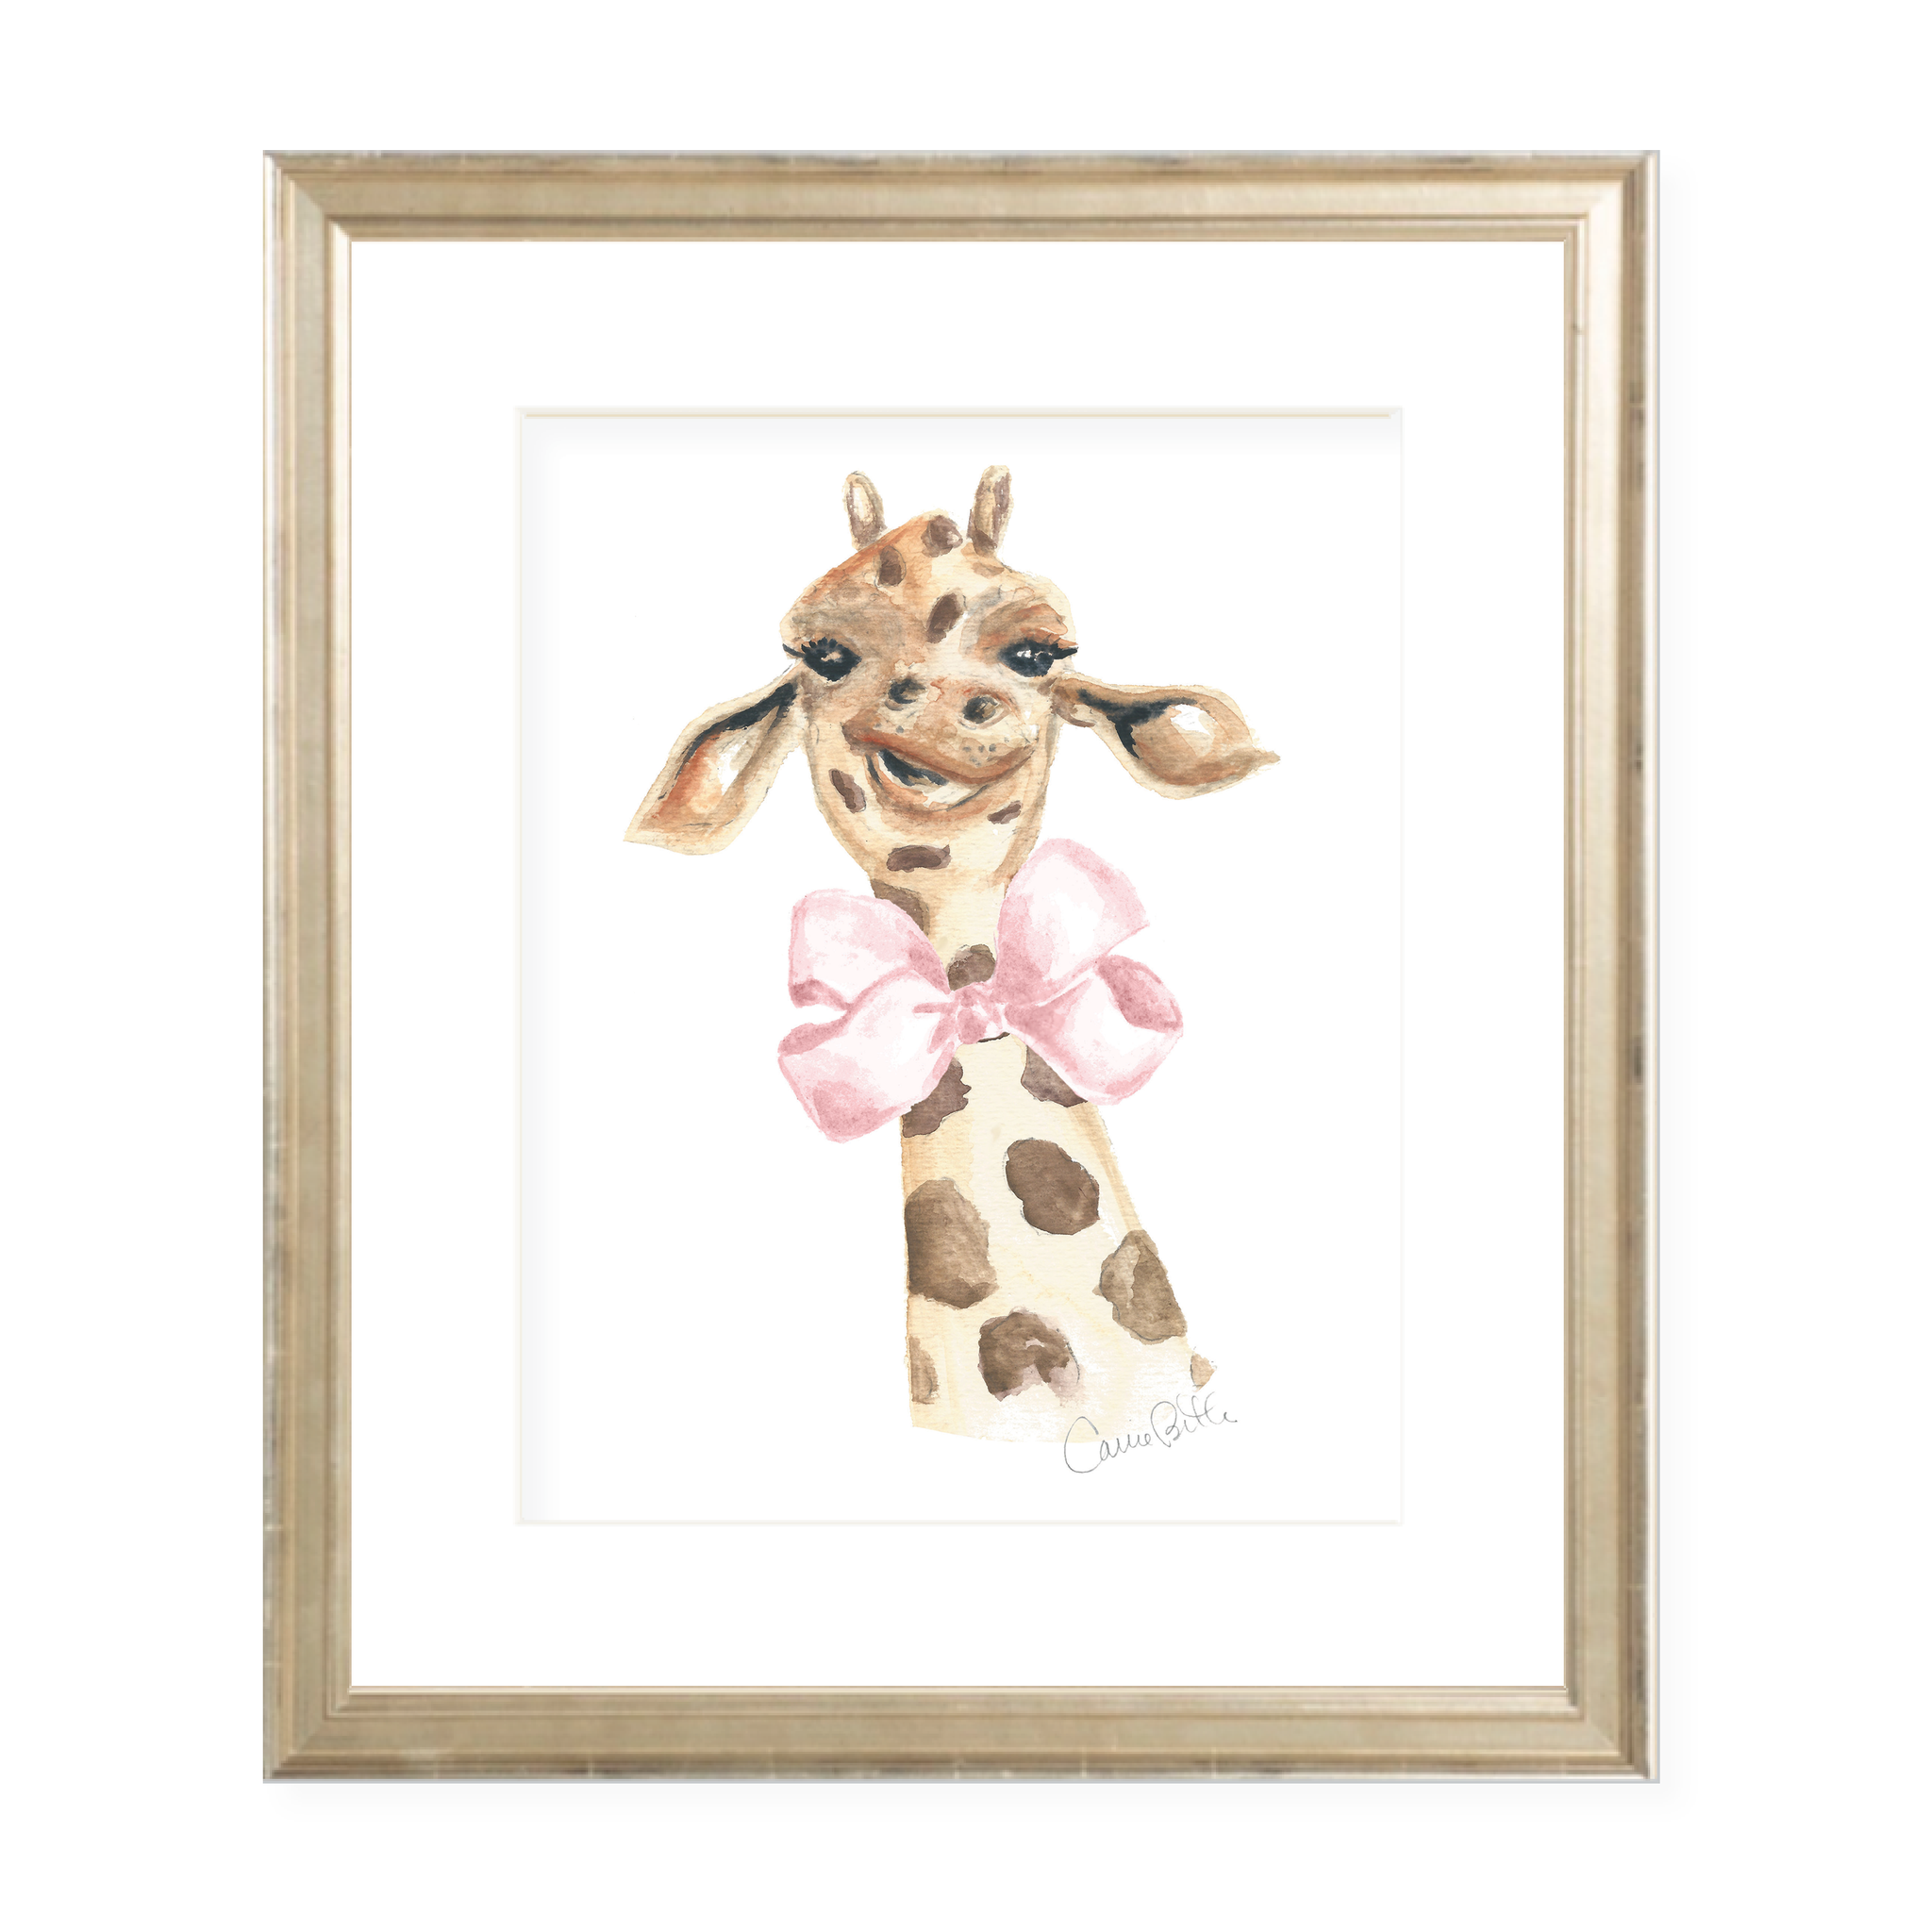 Georgette the Giraffe and Bow Watercolor Print